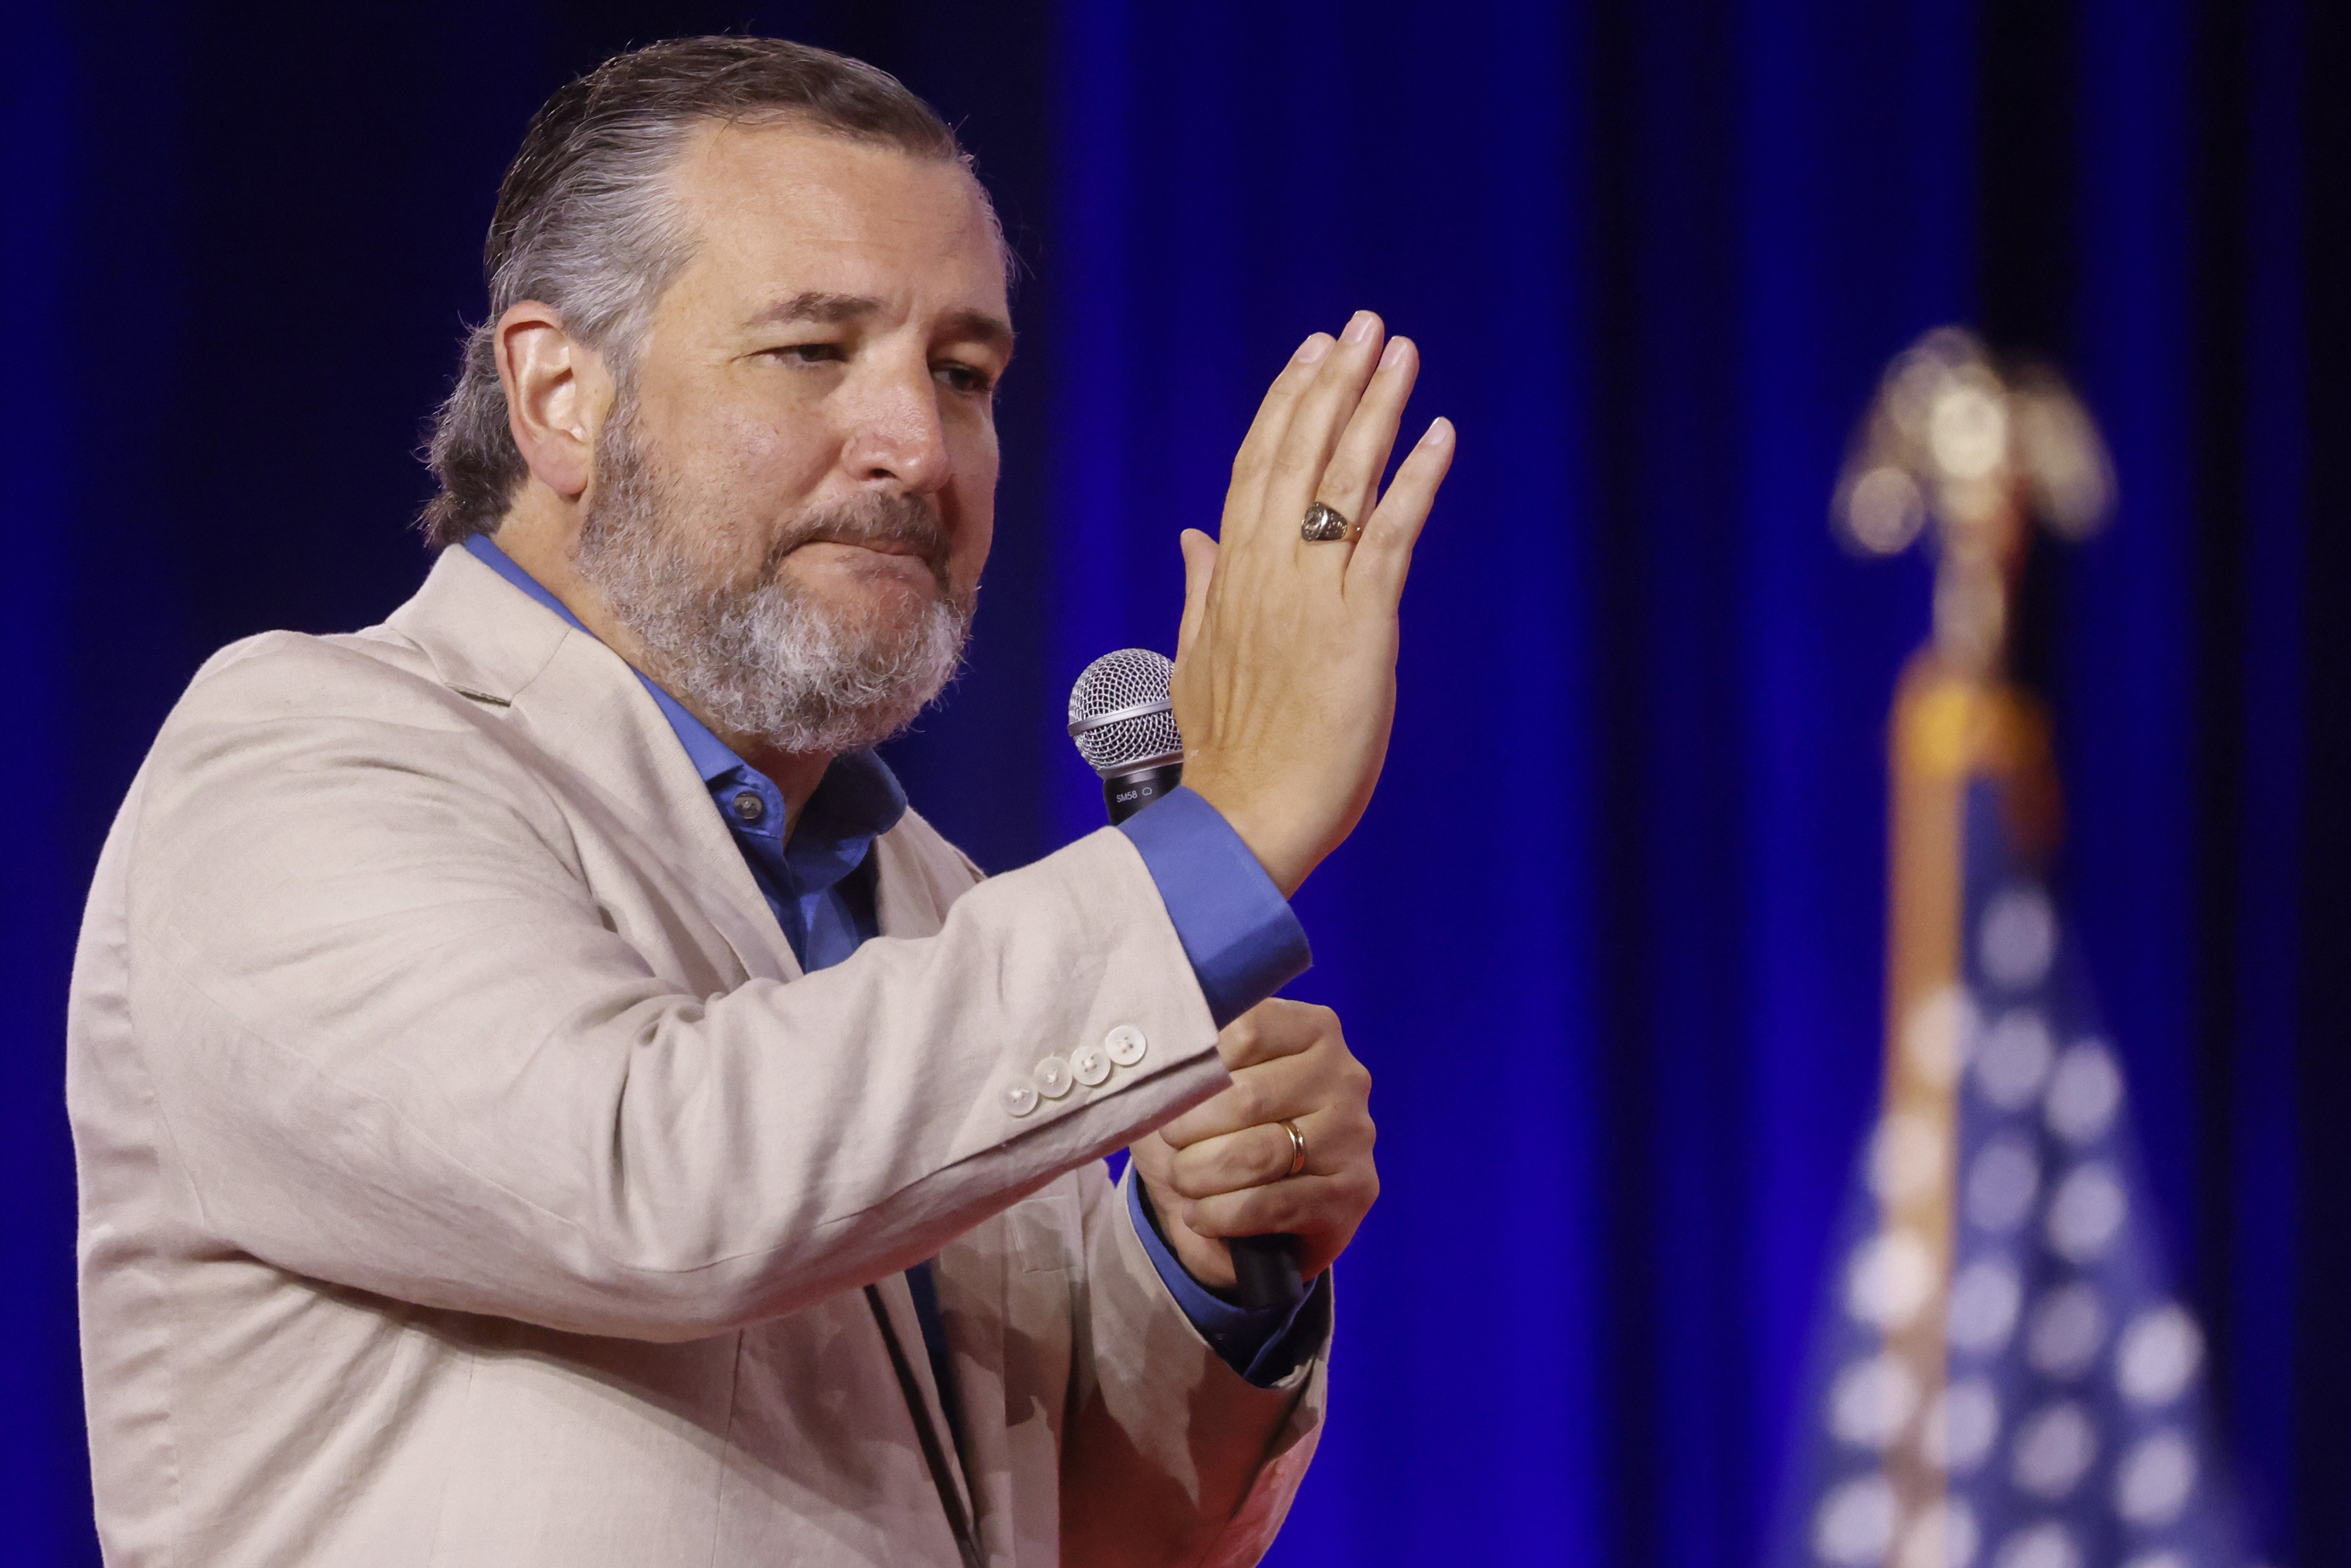 Ted Cruz softens on same-sex marriage, says reasonable people can disagree image picture